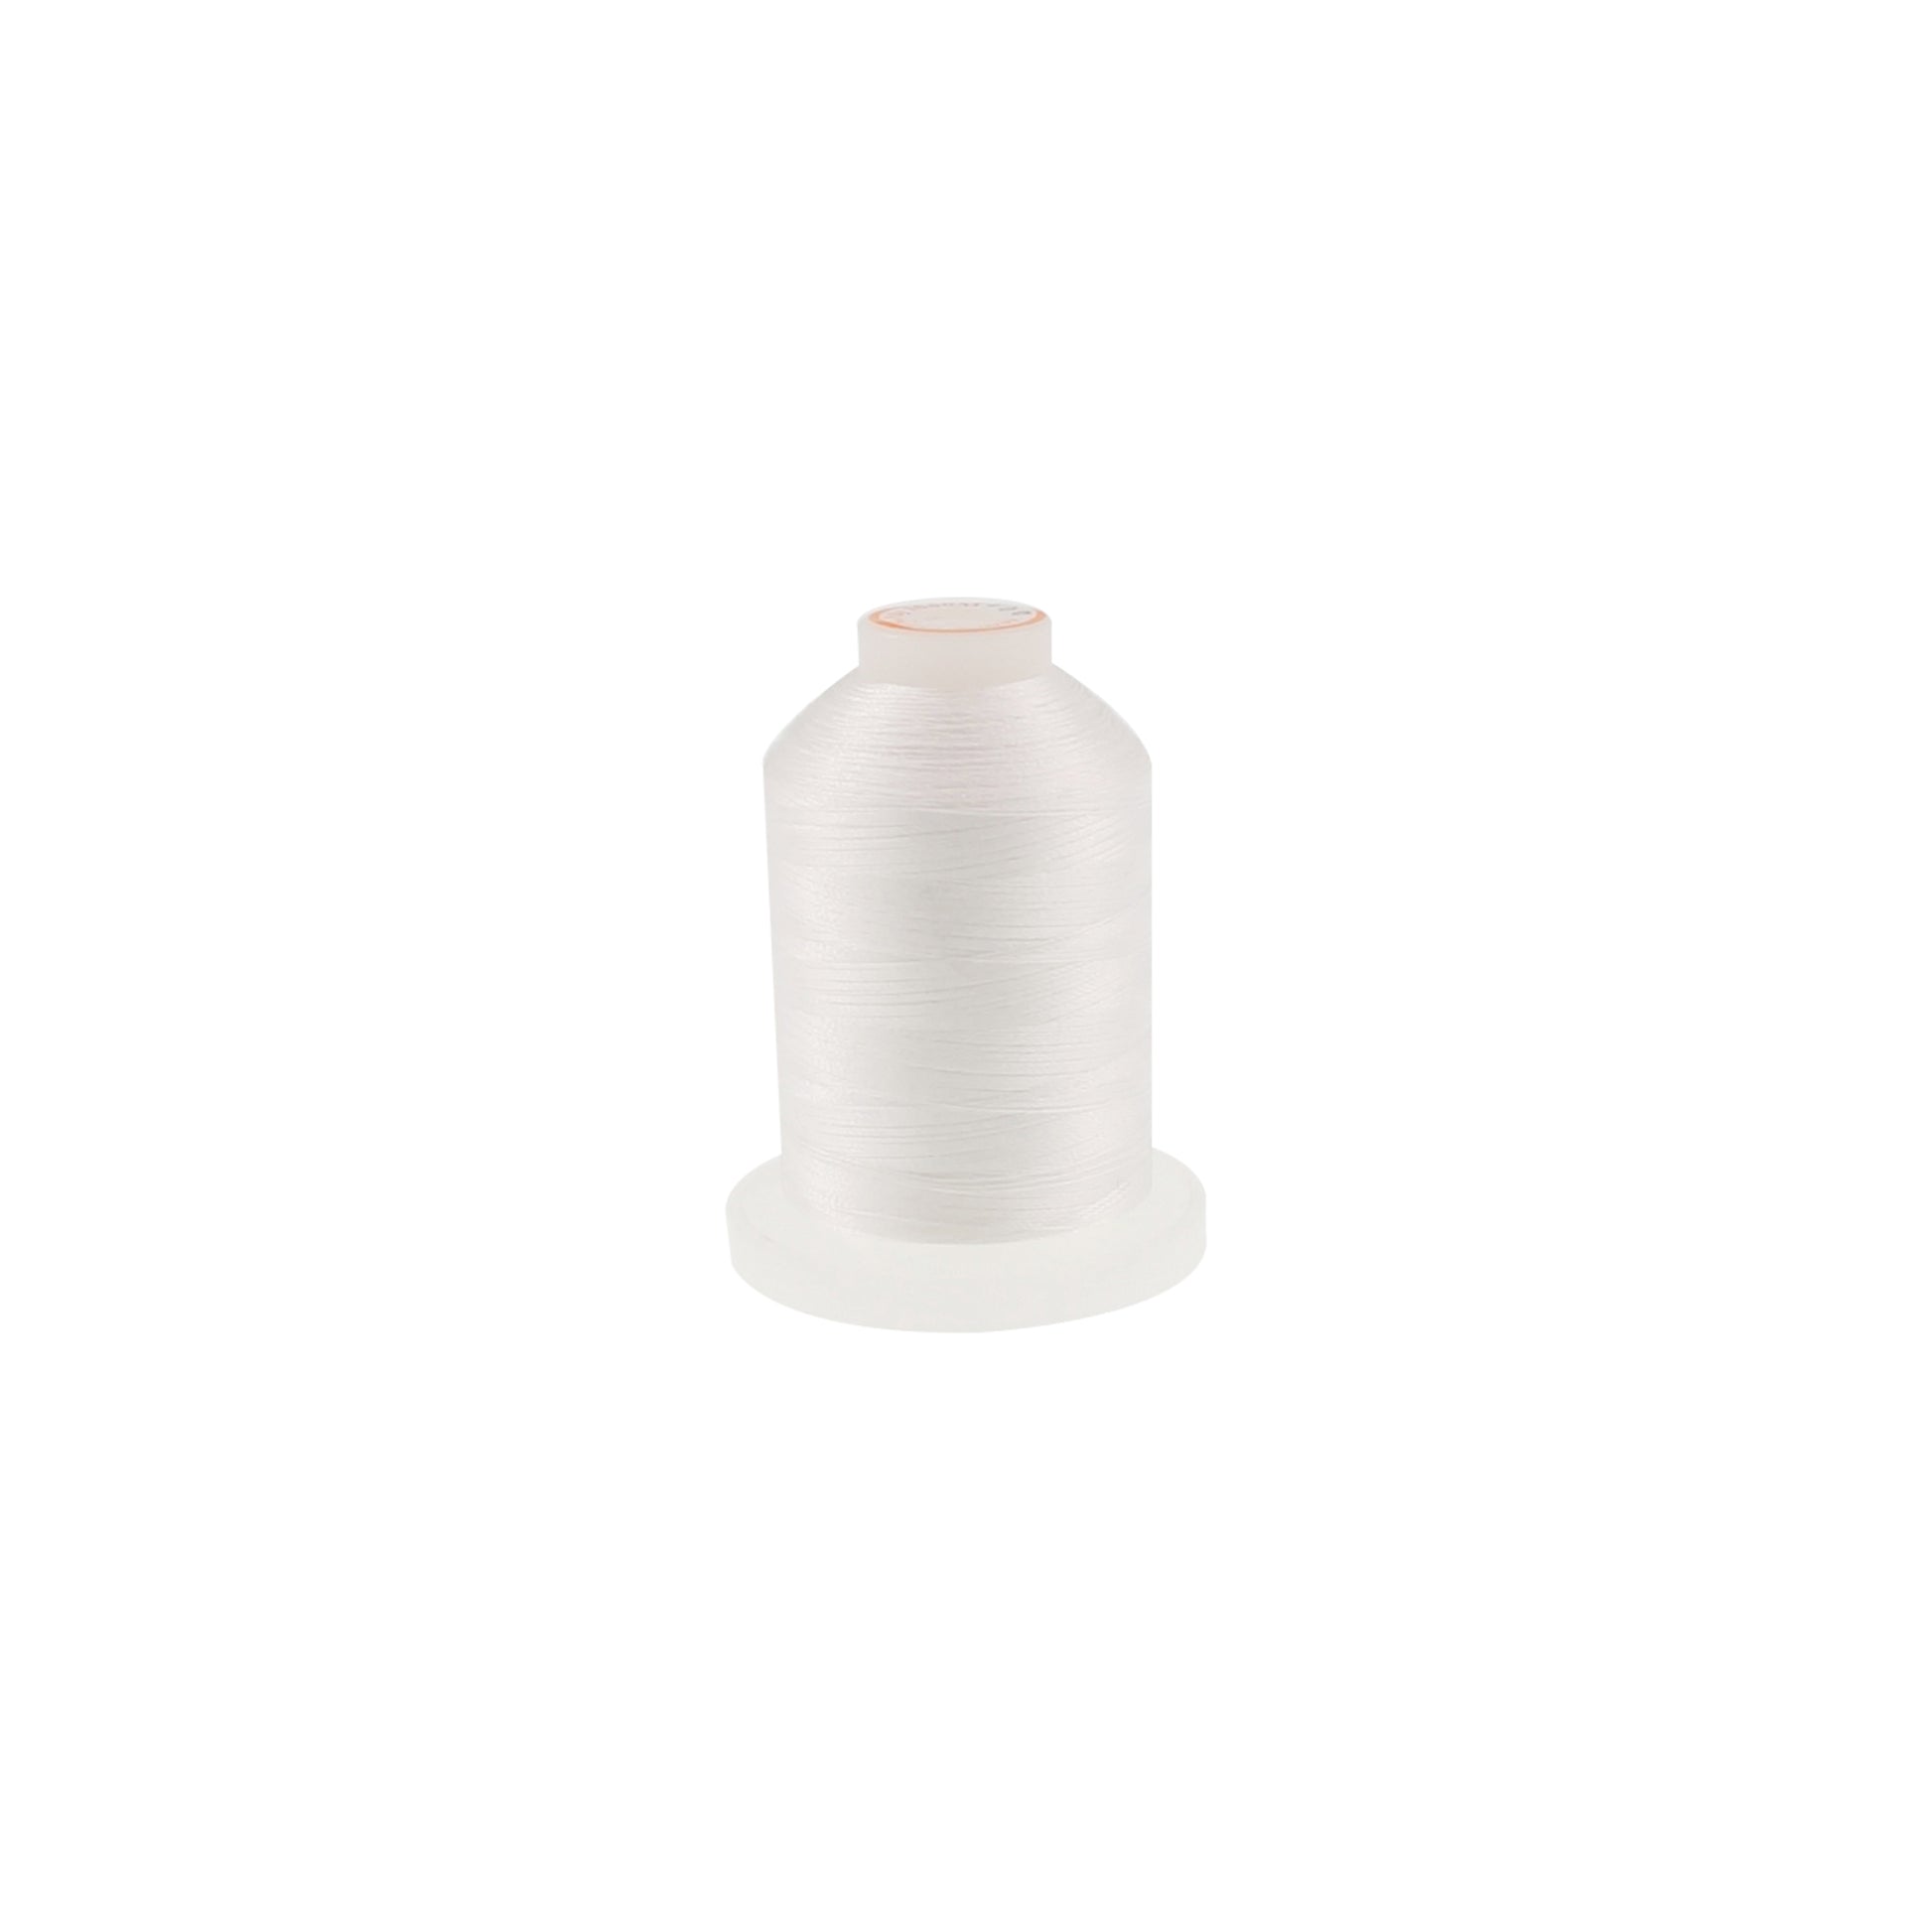 100-Cone Polyester Threads Kit with Stabilizers Samples